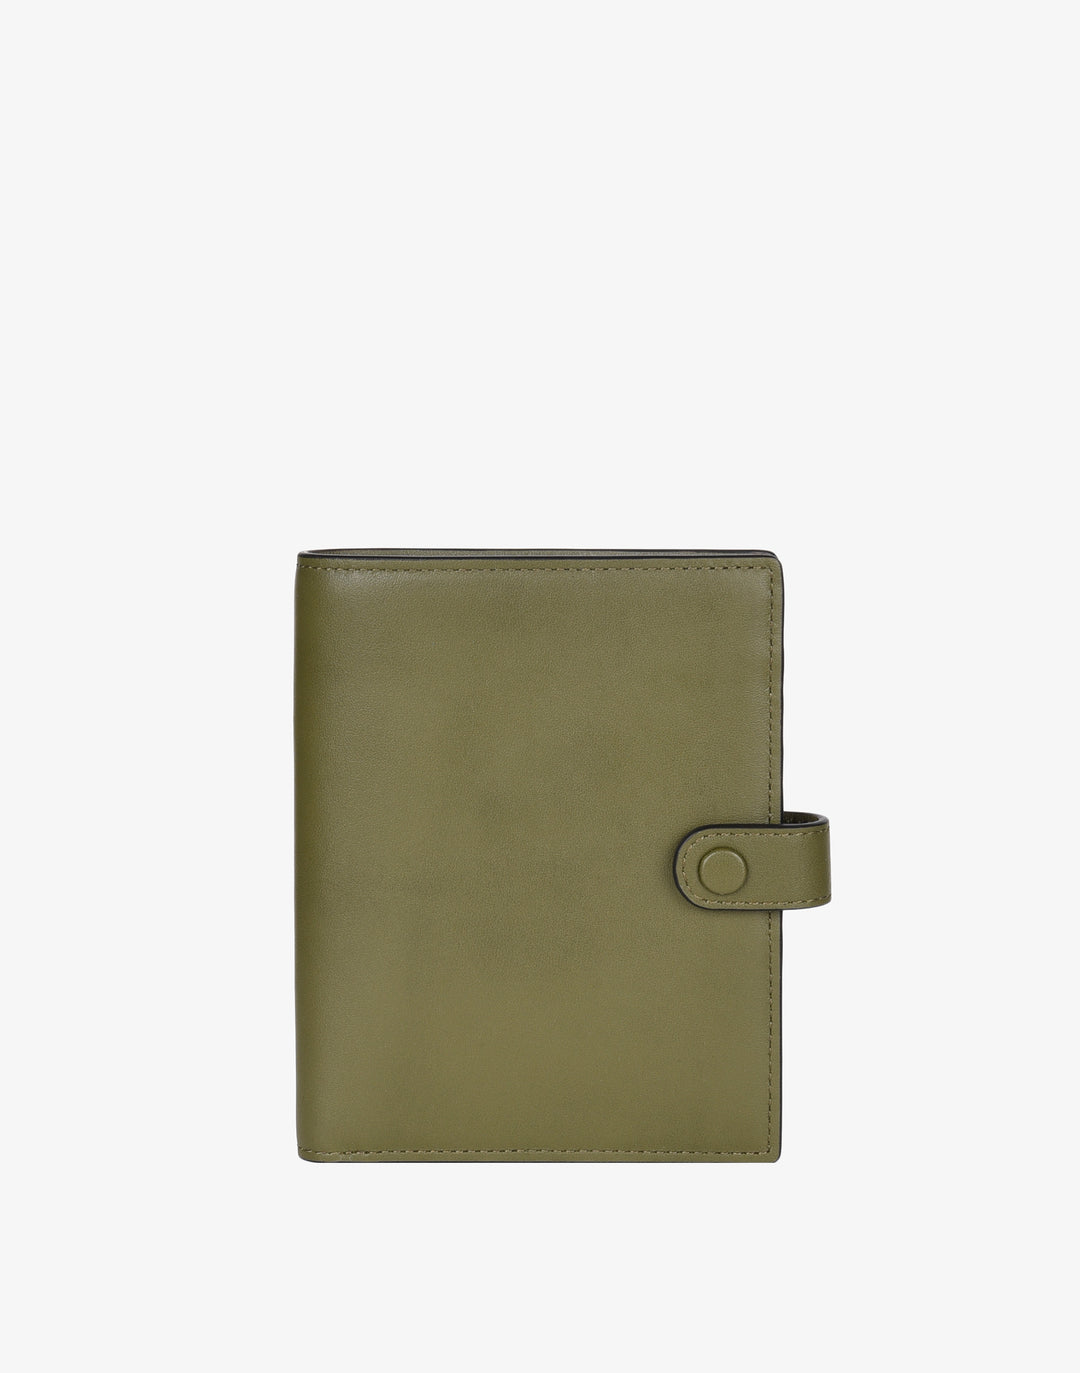 hyer goods recycled leather travel passport wallet olive#color_olive